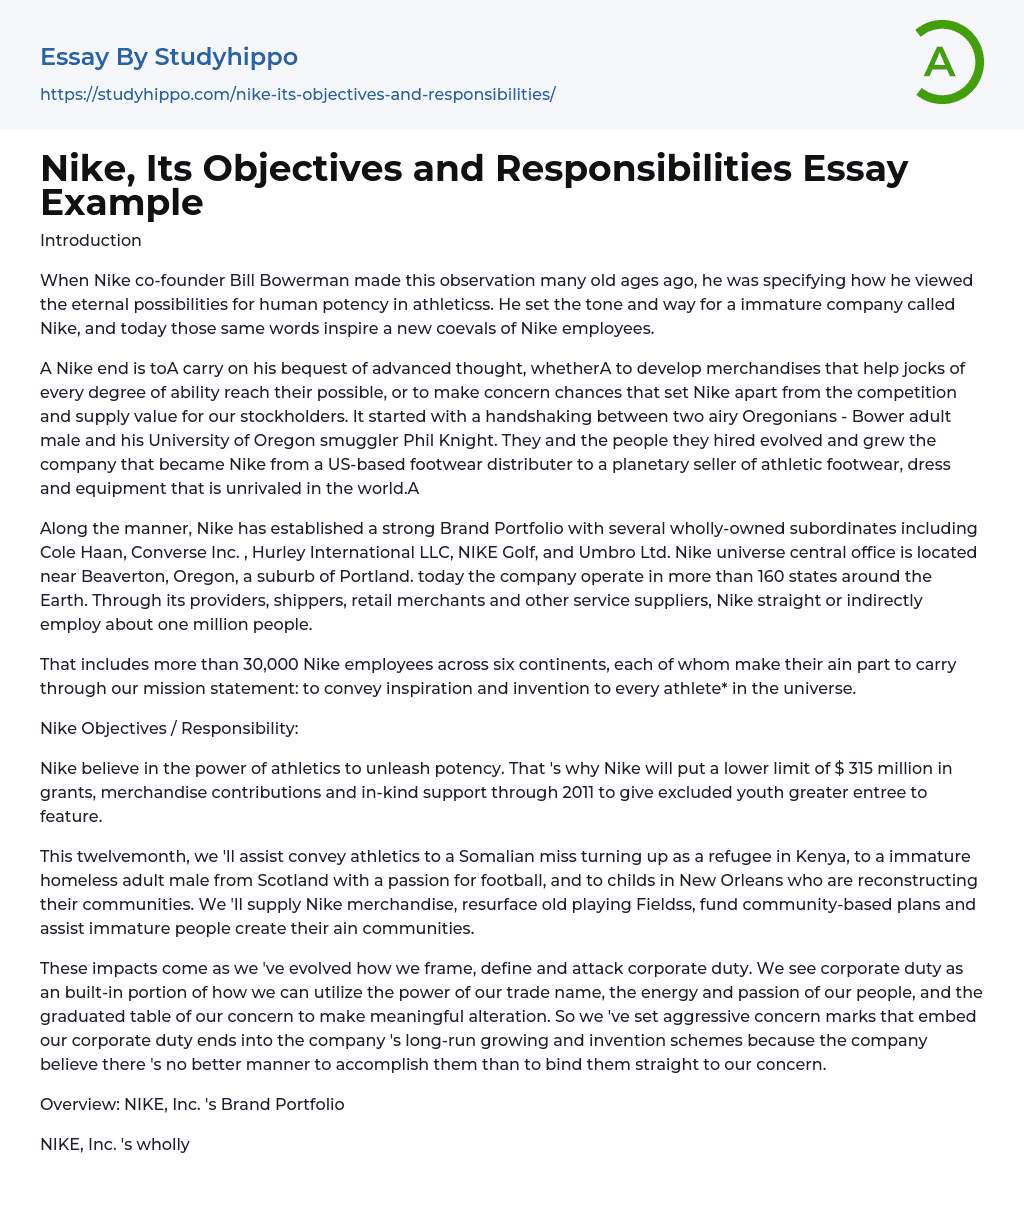 Nike, Its Objectives and Responsibilities Essay Example